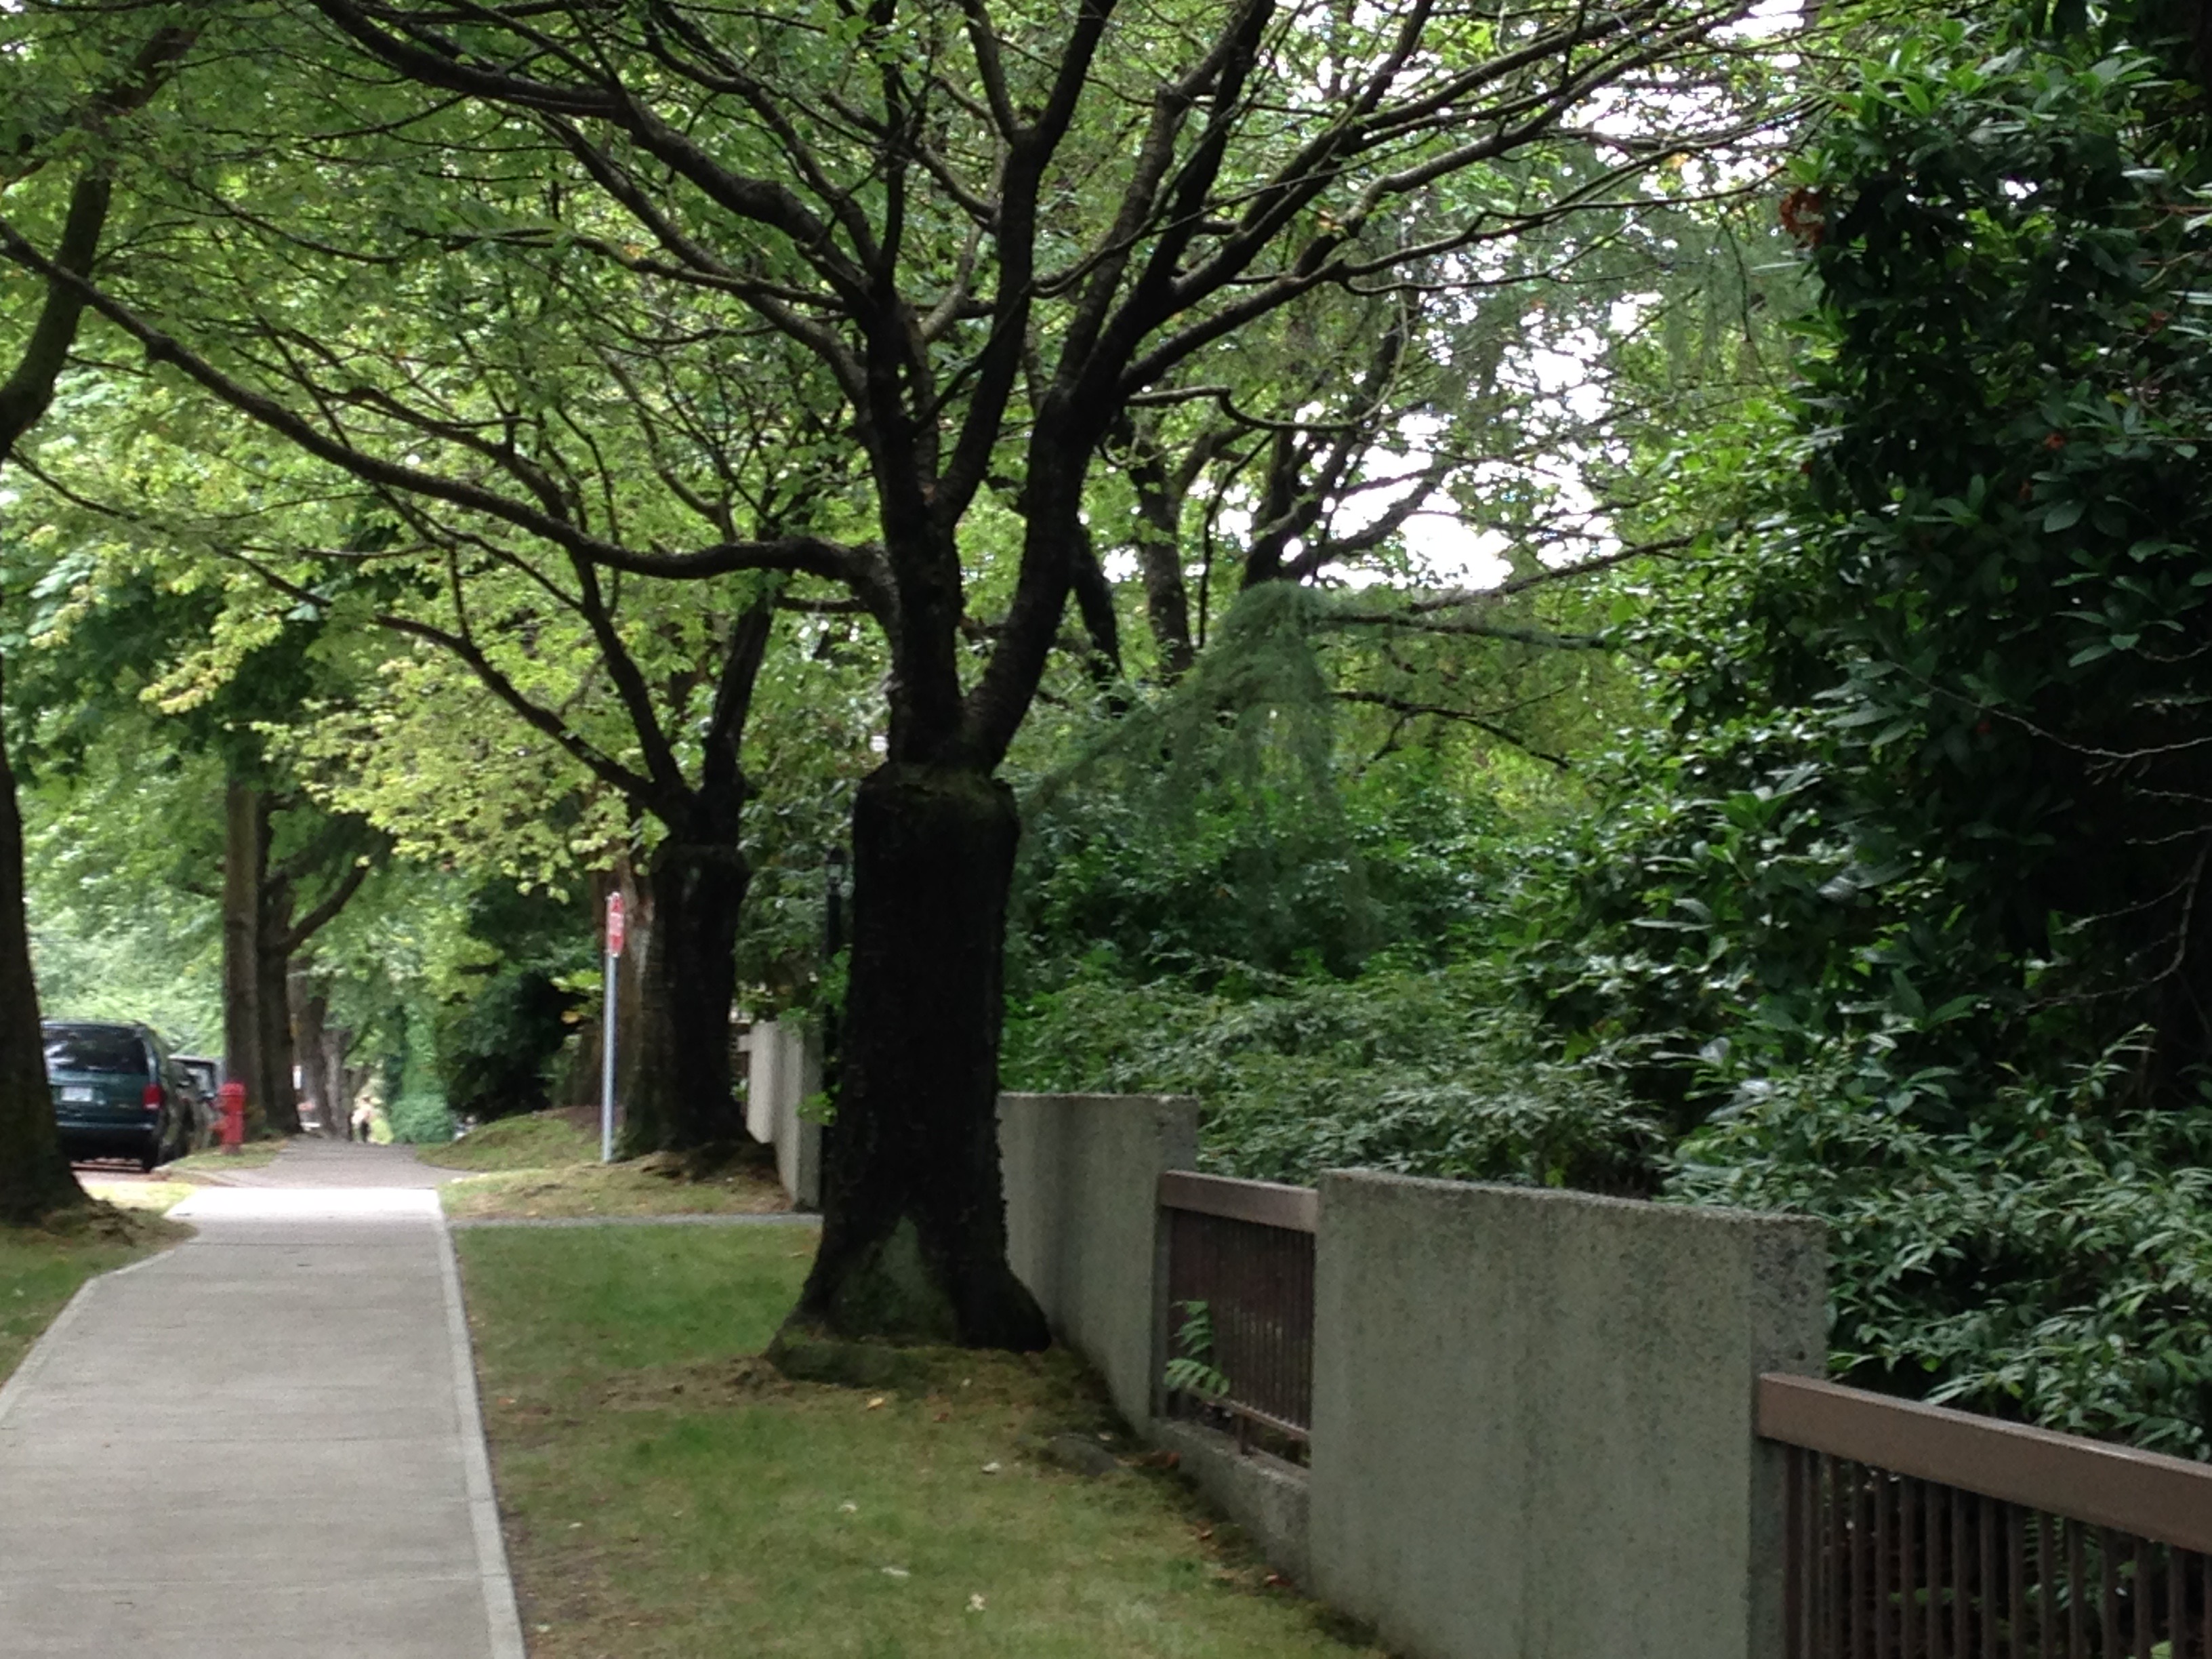 Pollarded trees line one of Kits's residential streets. Their shade was very welcomed on a hot day.